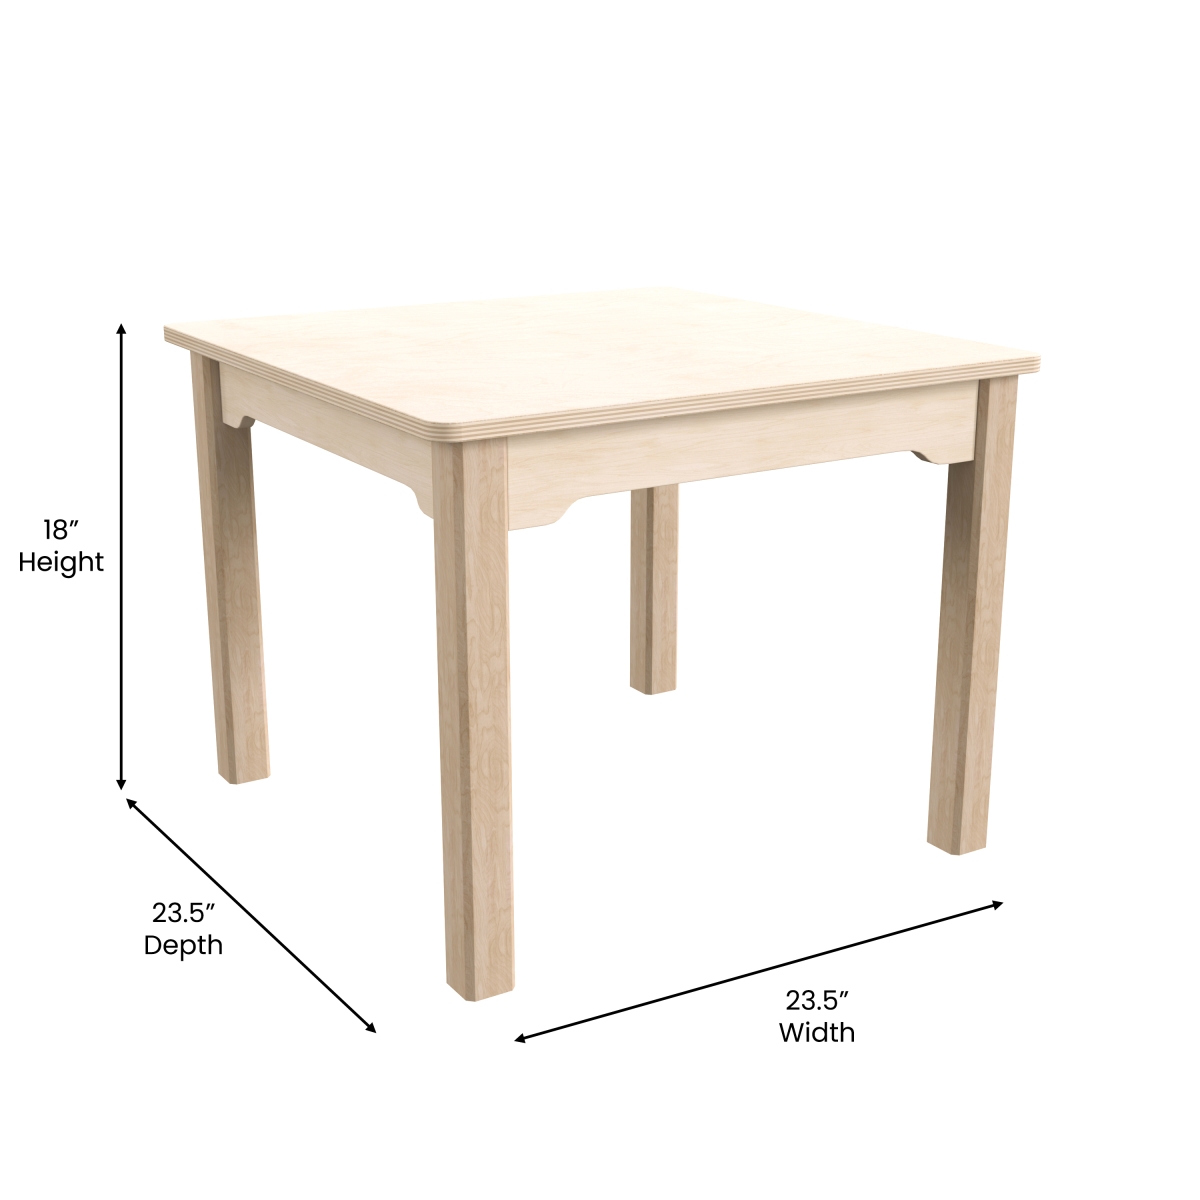 Picture of Flash Furniture MK-ME088008-GG 23.5 x 18 in. Bright Beginnings Commercial Grade Wooden Square Preschool Classroom Activity Table, Beech